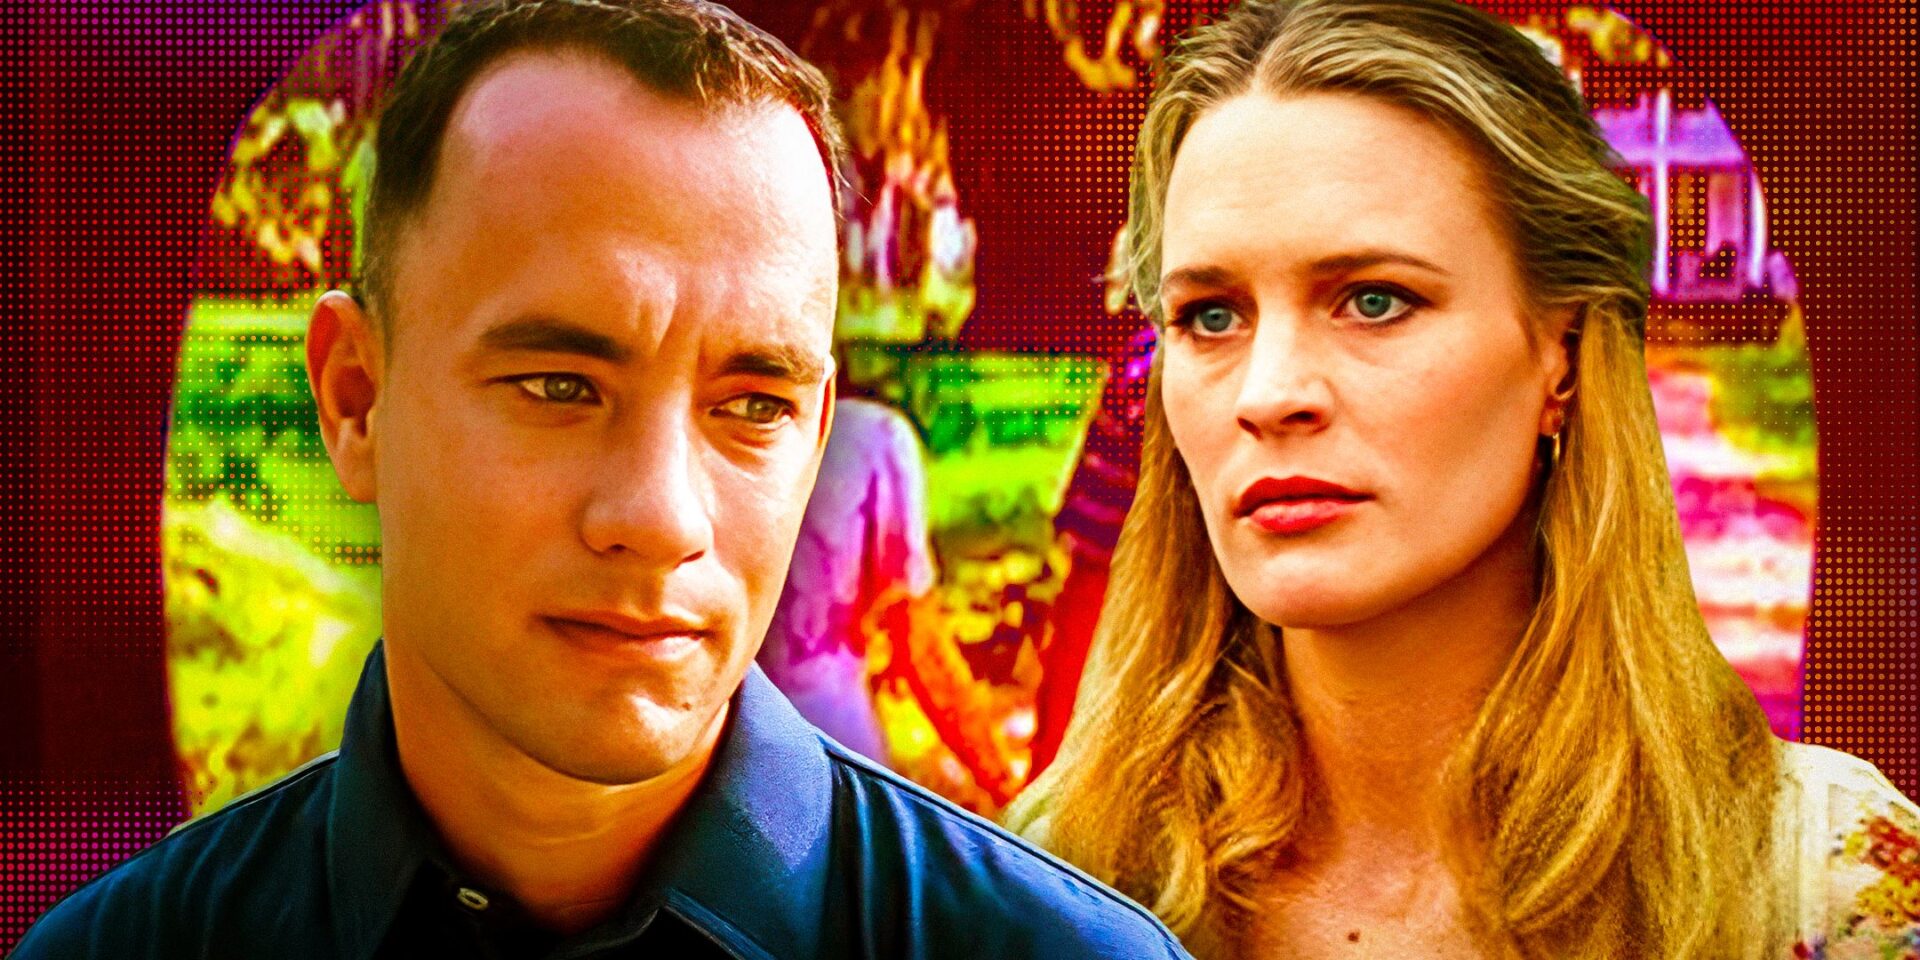 Where The Forrest Gump Cast Is Now: What Each Actor Did After The 1994 Movie